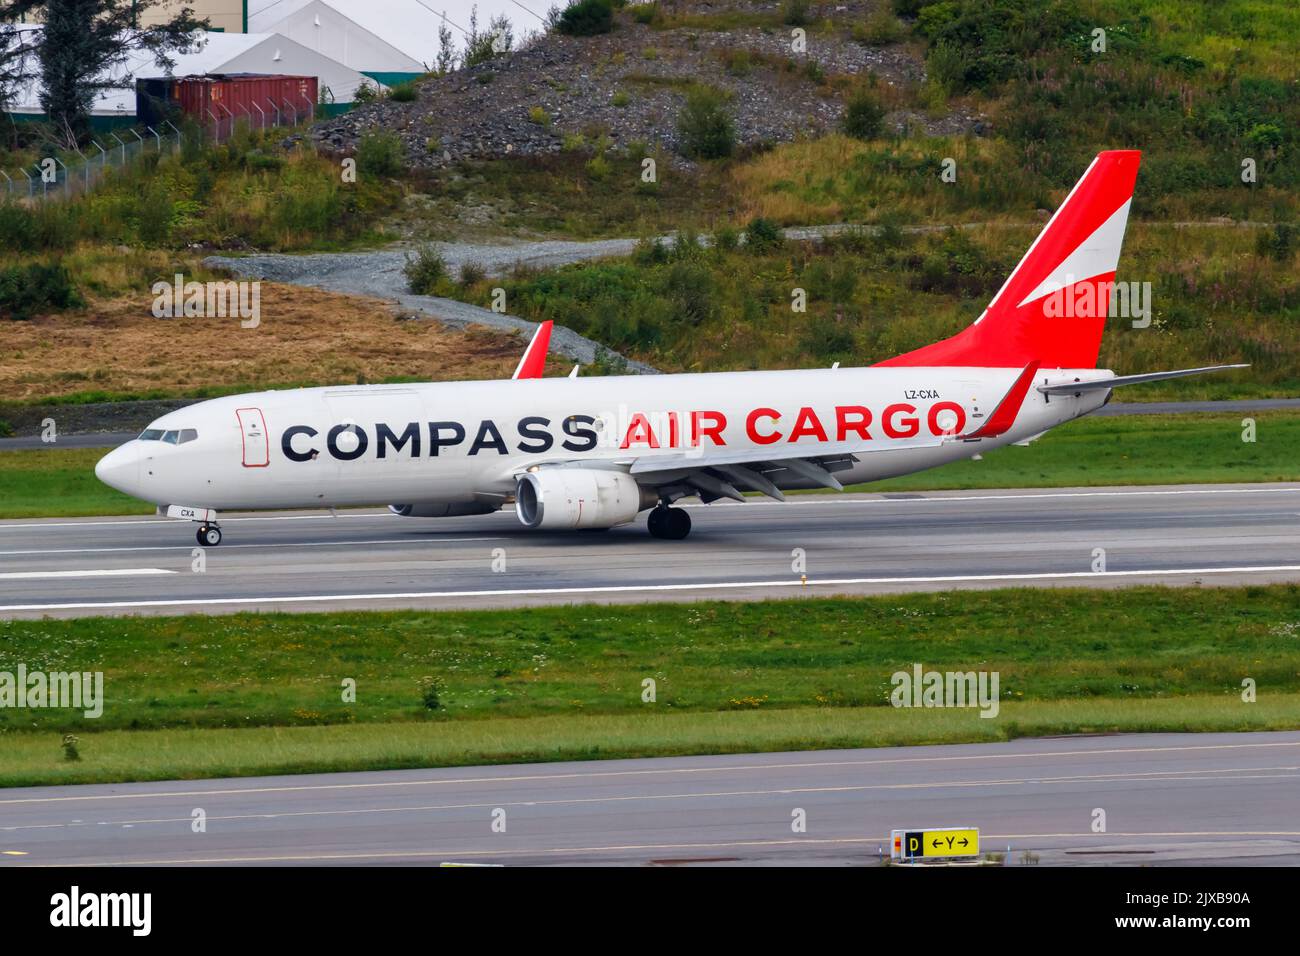 Bergen, Norway - August 18, 2022: Compass Air Cargo Boeing 737-800(SF) airplane at Bergen airport (BGO) in Norway. Stock Photo